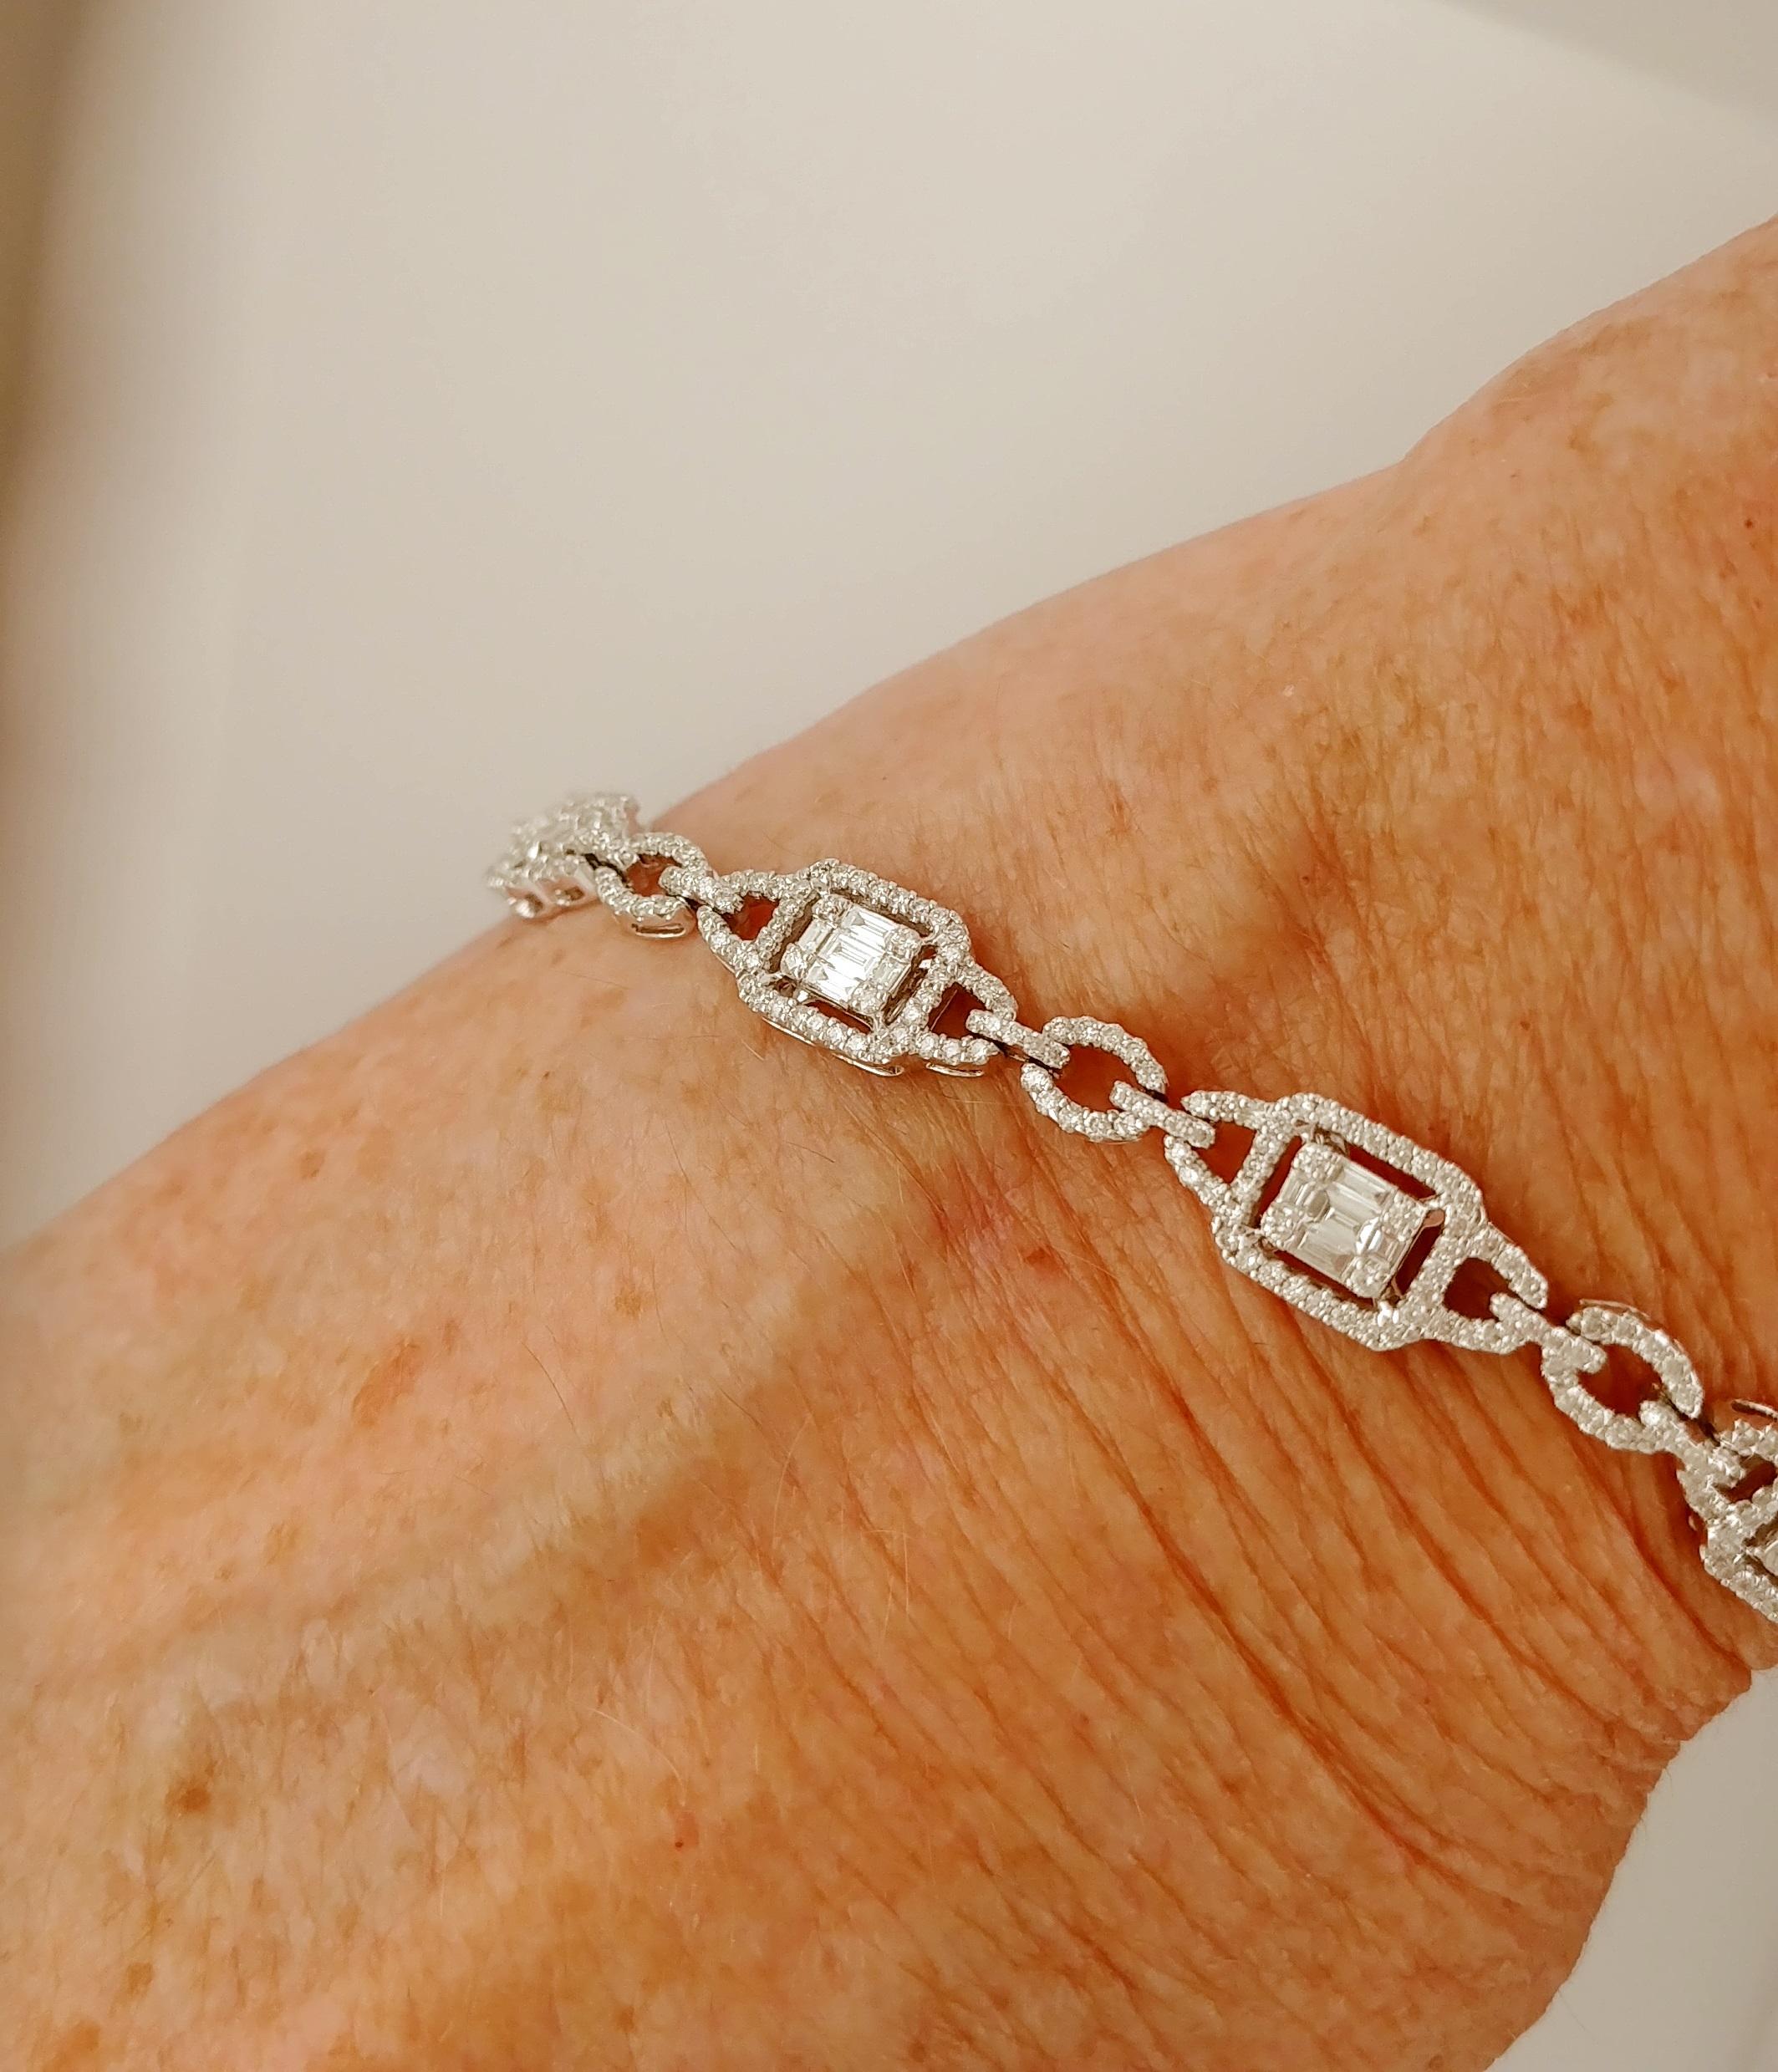 Modern Bracelet 18K White Gold with Baguette & Round Diamonds is 7 inches long. 7.75mm wide and weighs 13.4 grams.   Bracelet is set with 0.85 carats total weight baguette and round brilliant cut diamonds for a delicate yet stunning presentation. 